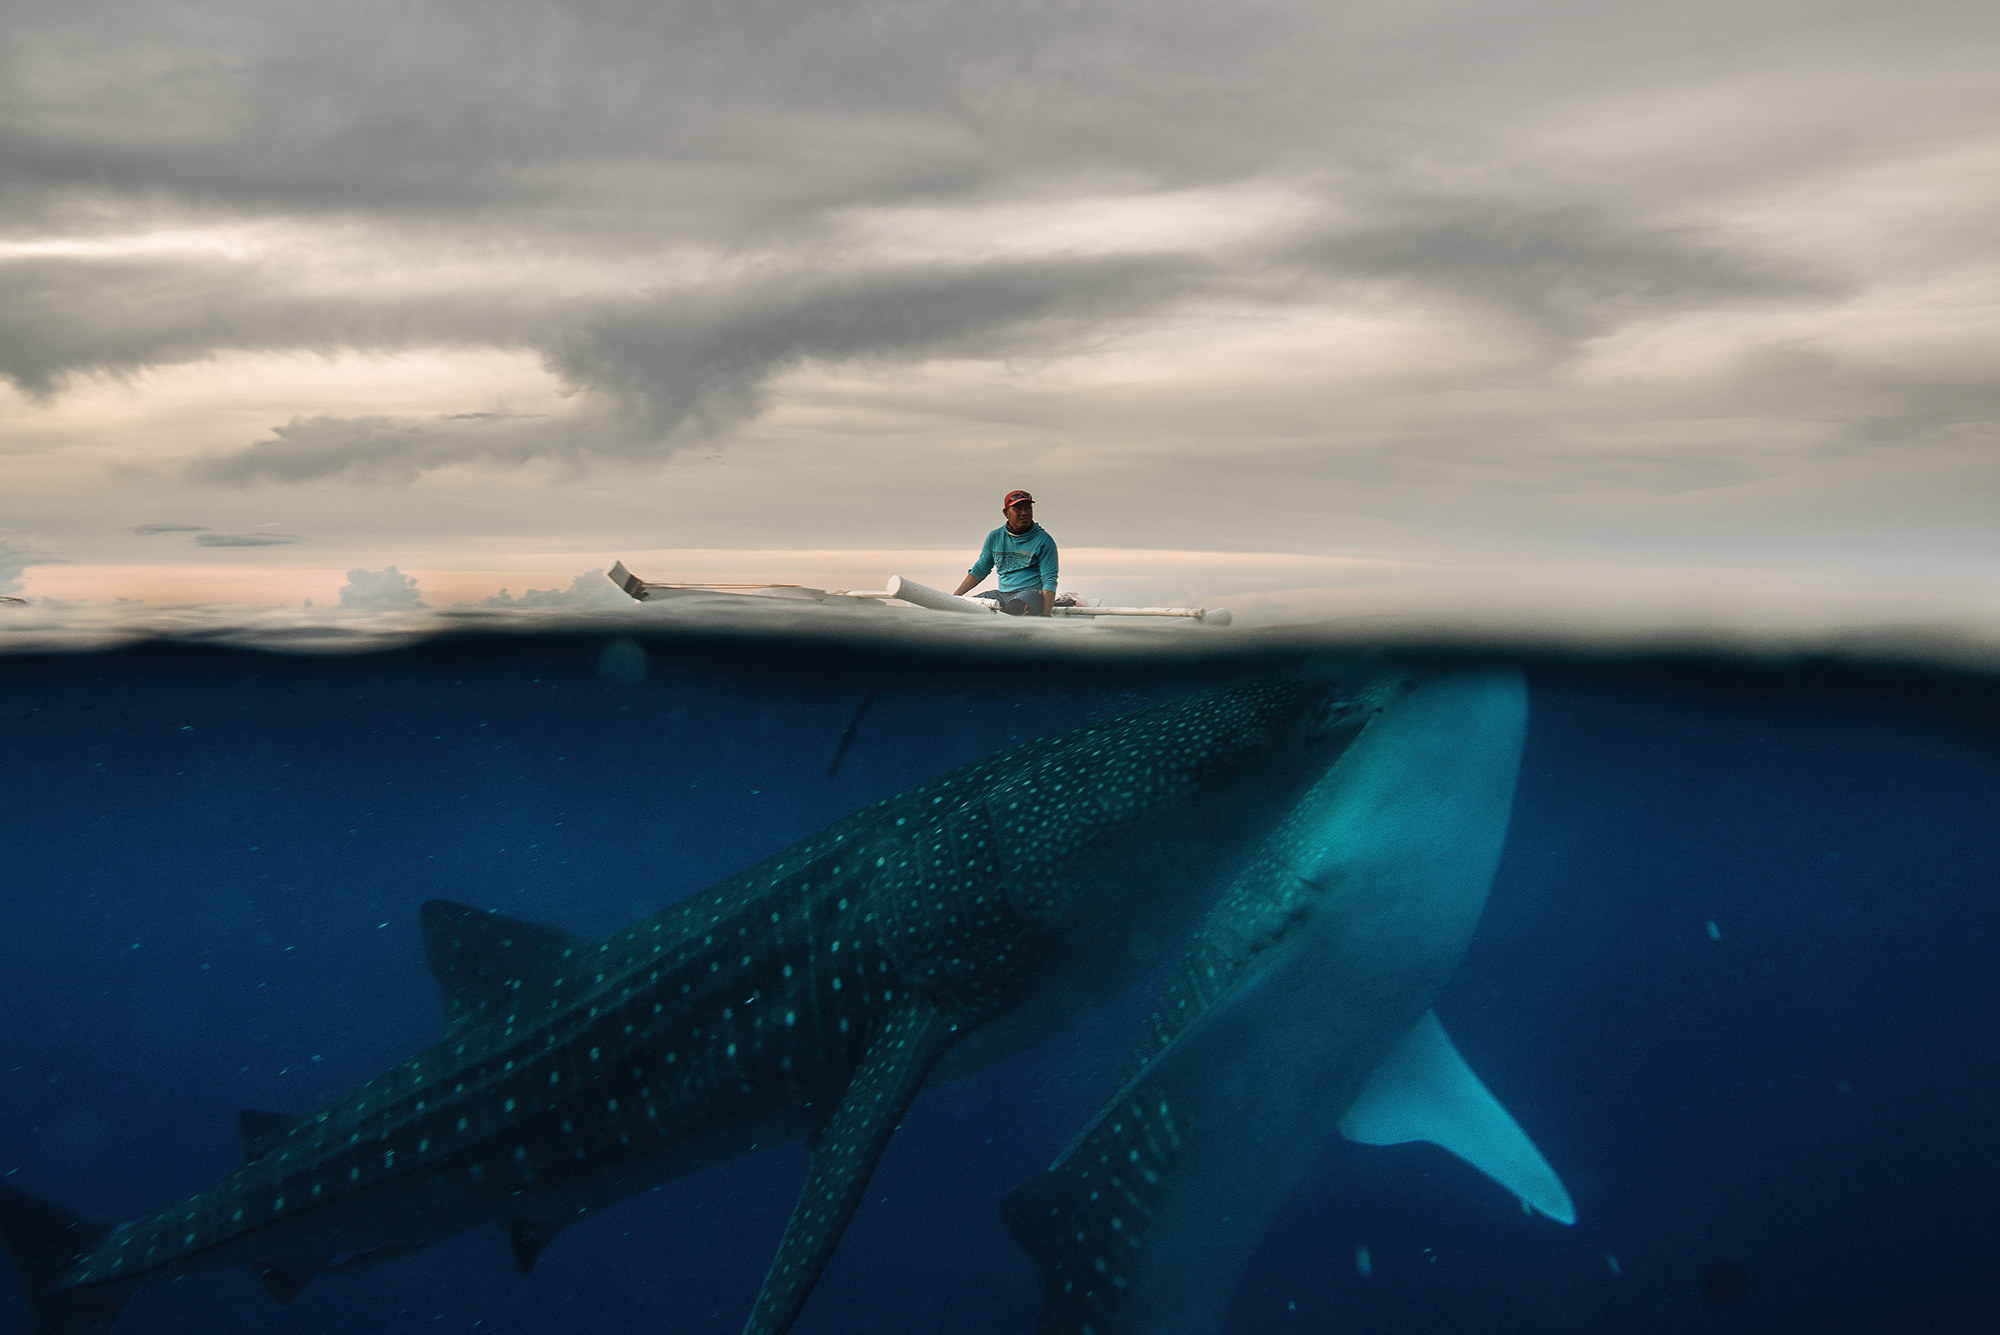 Two whales seen underwater beneath a man in a boat on the surface